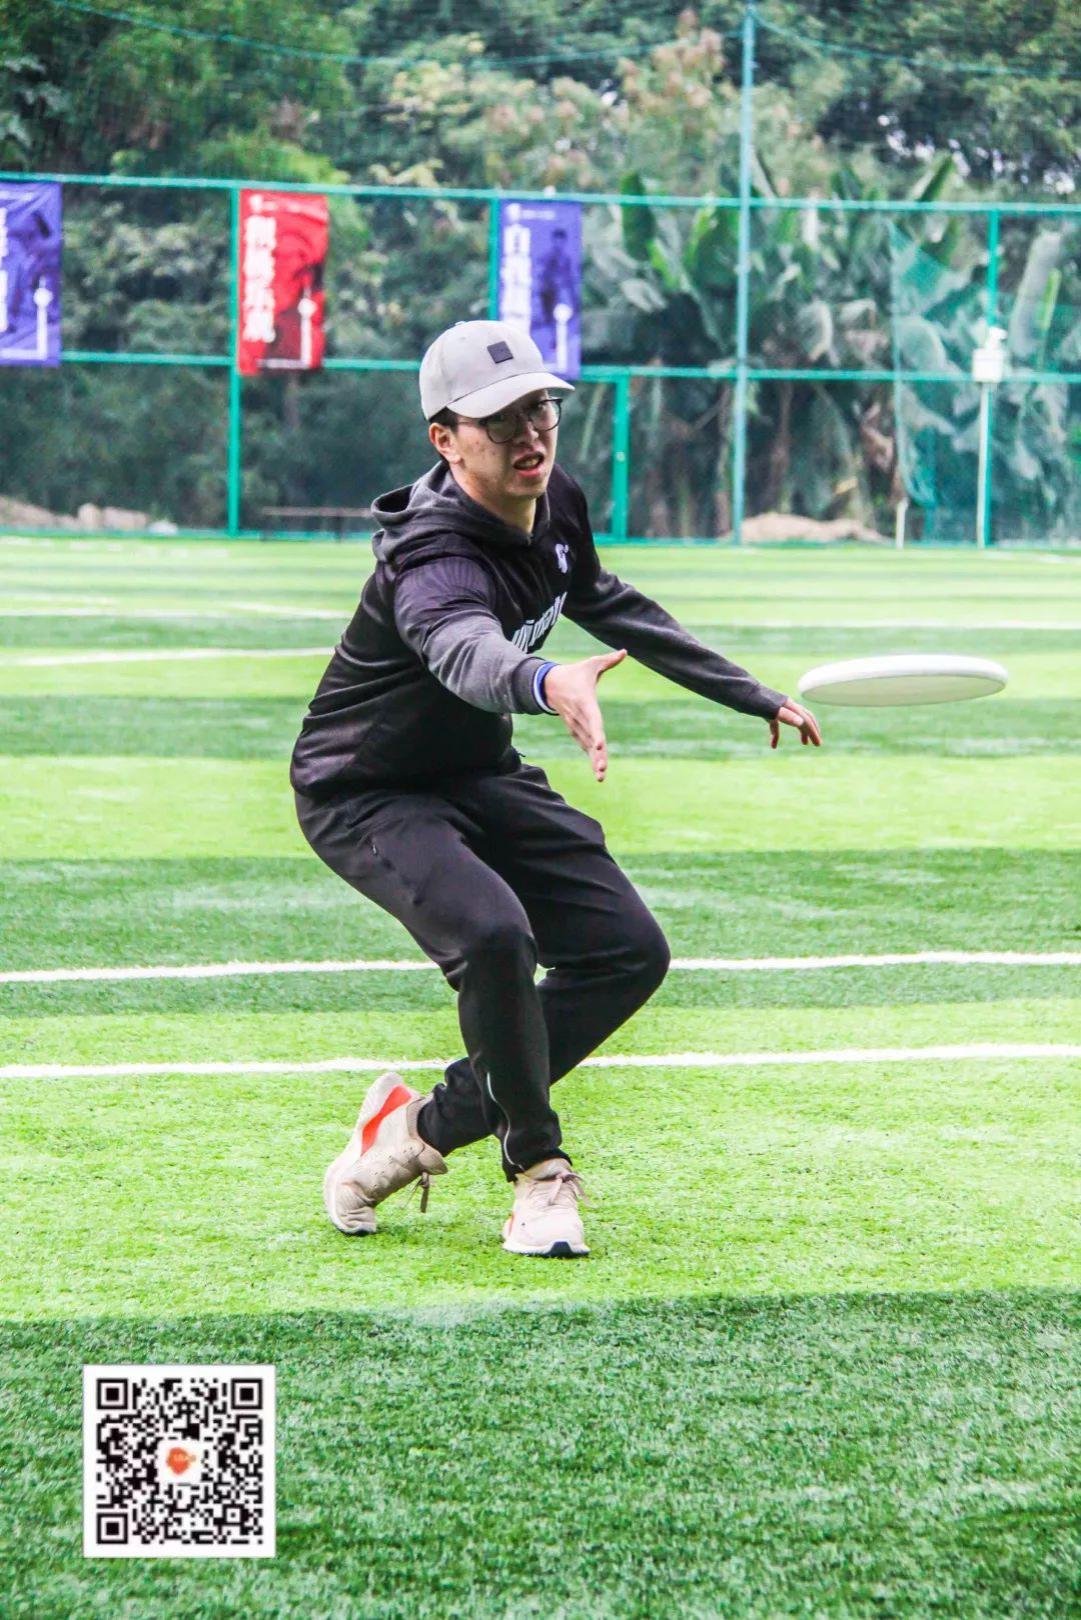 http://www.leaoultimate.com/wp-content/uploads/2019/04/2019041808210376819125158.jpg